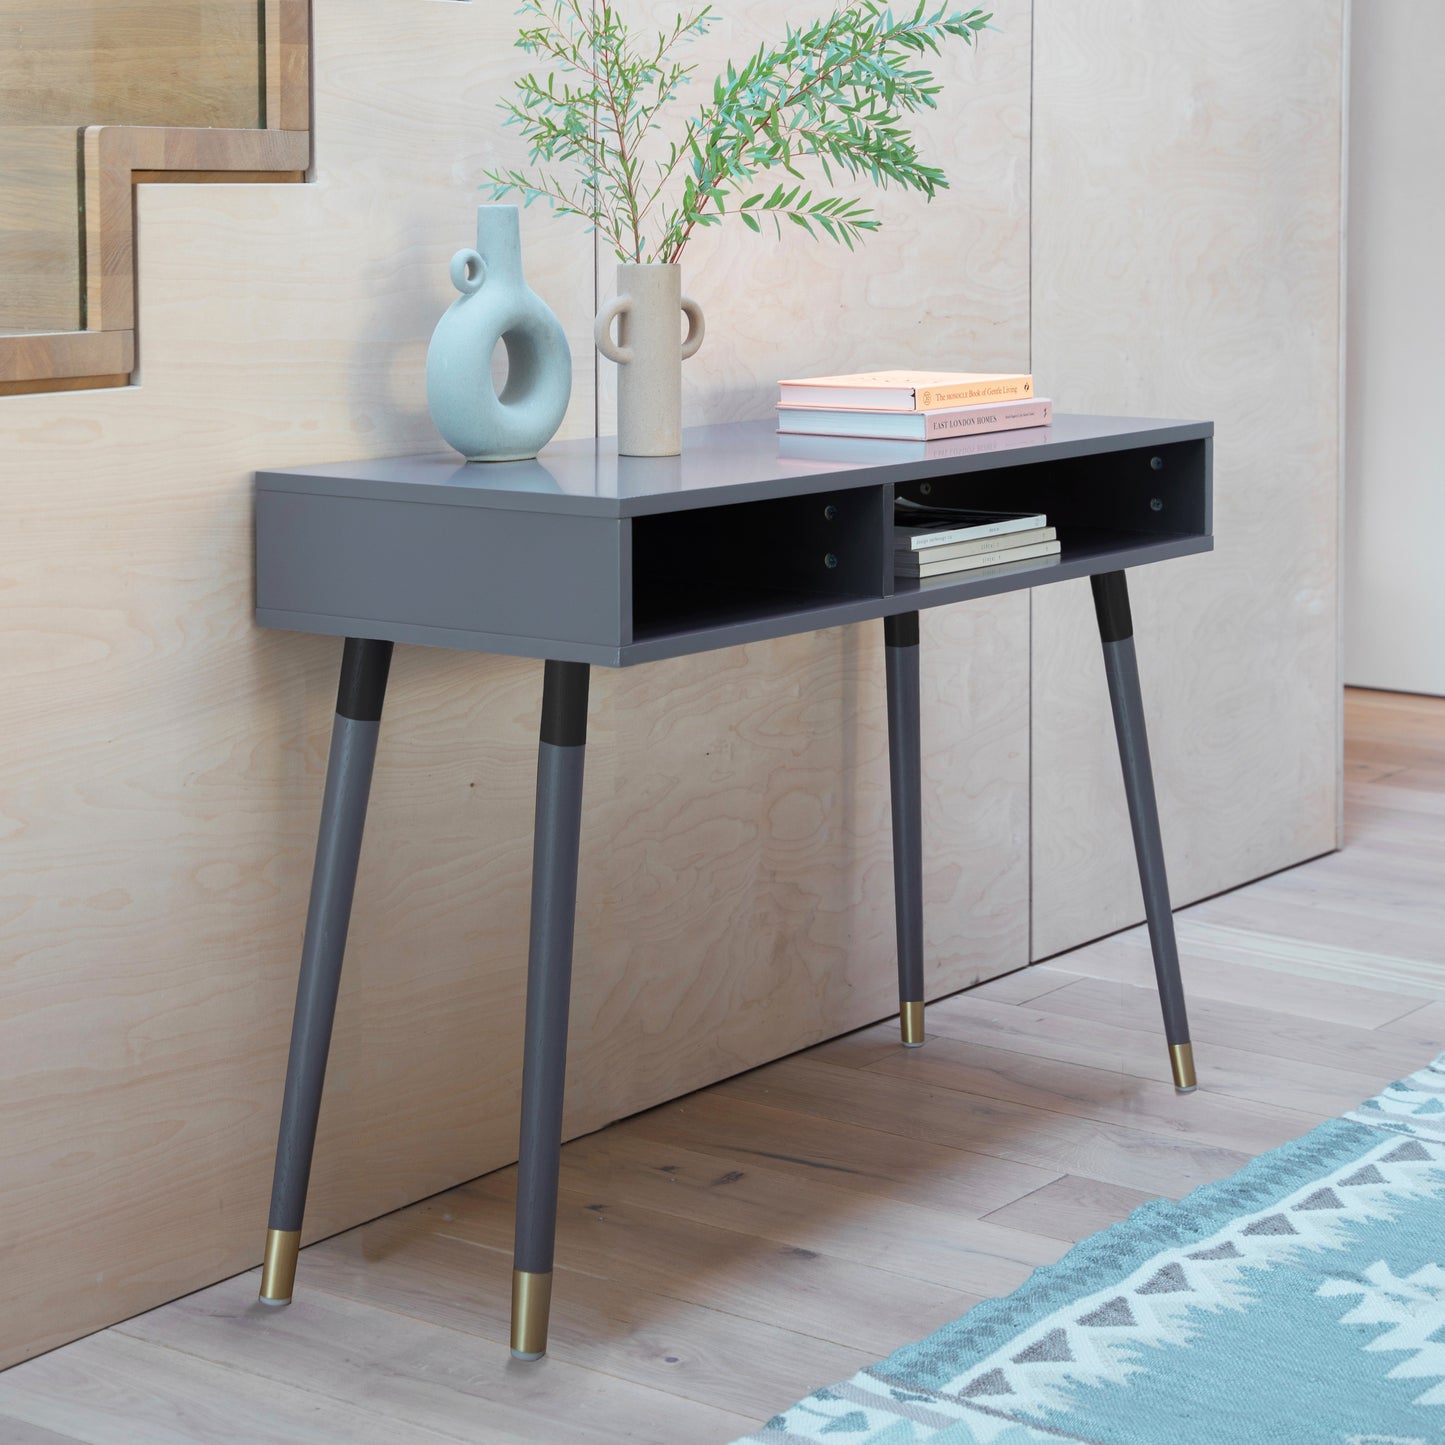 A Thurlestone Console Table Grey 1100x450x770mm by Kikiathome.co.uk, perfect for home furniture and interior decor.